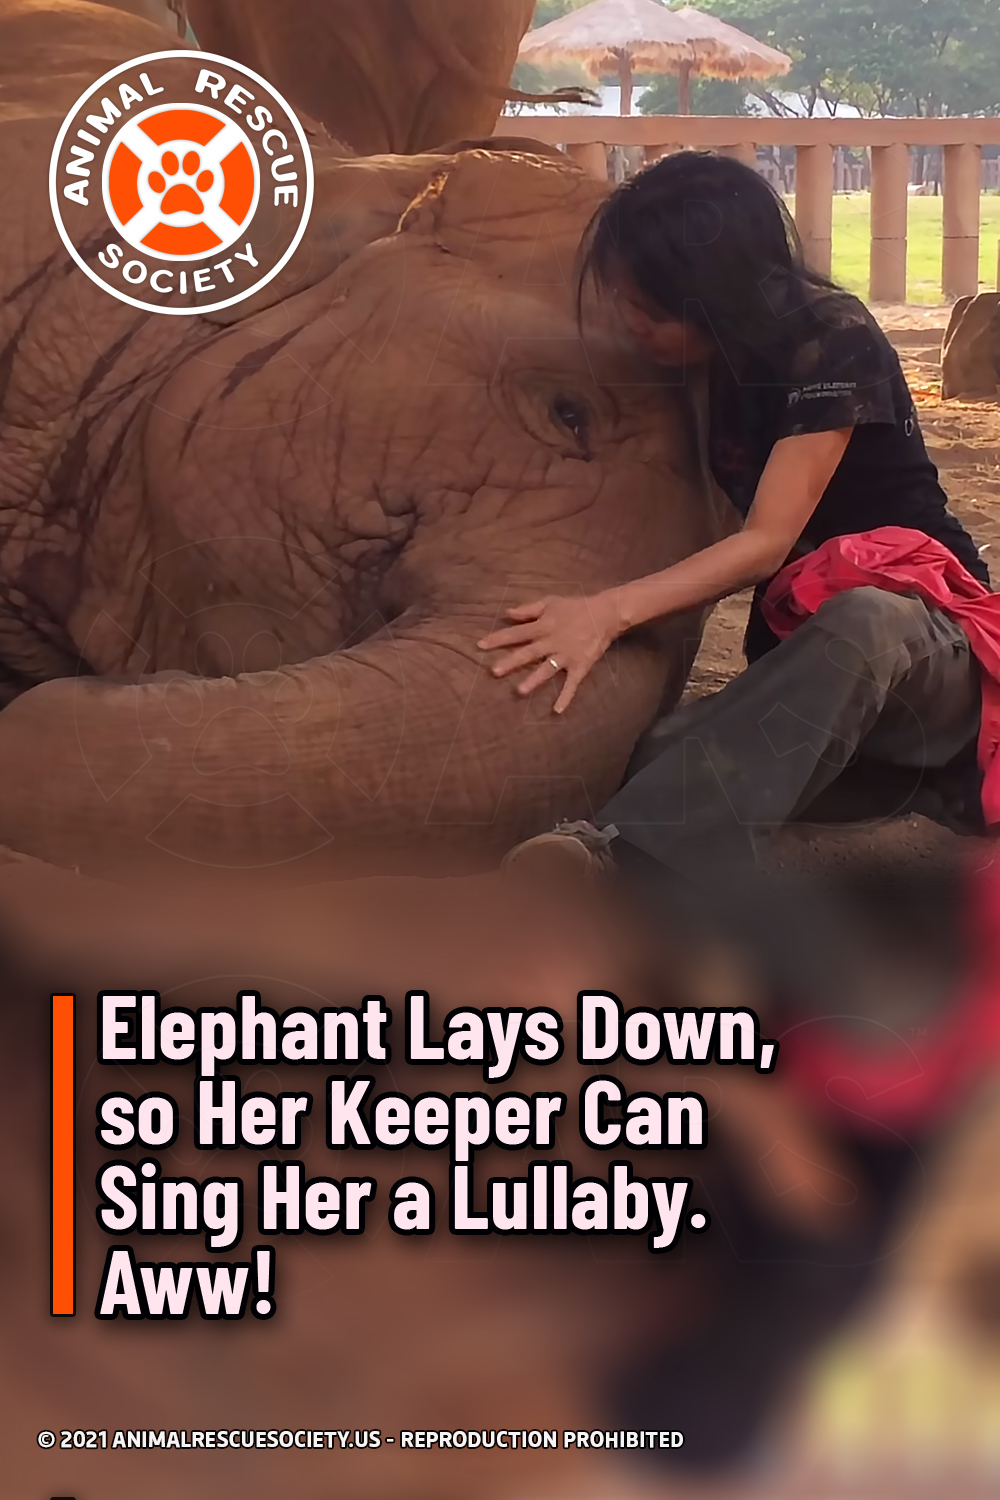 Elephant Lays Down, so Her Keeper Can Sing Her a Lullaby. Aww!